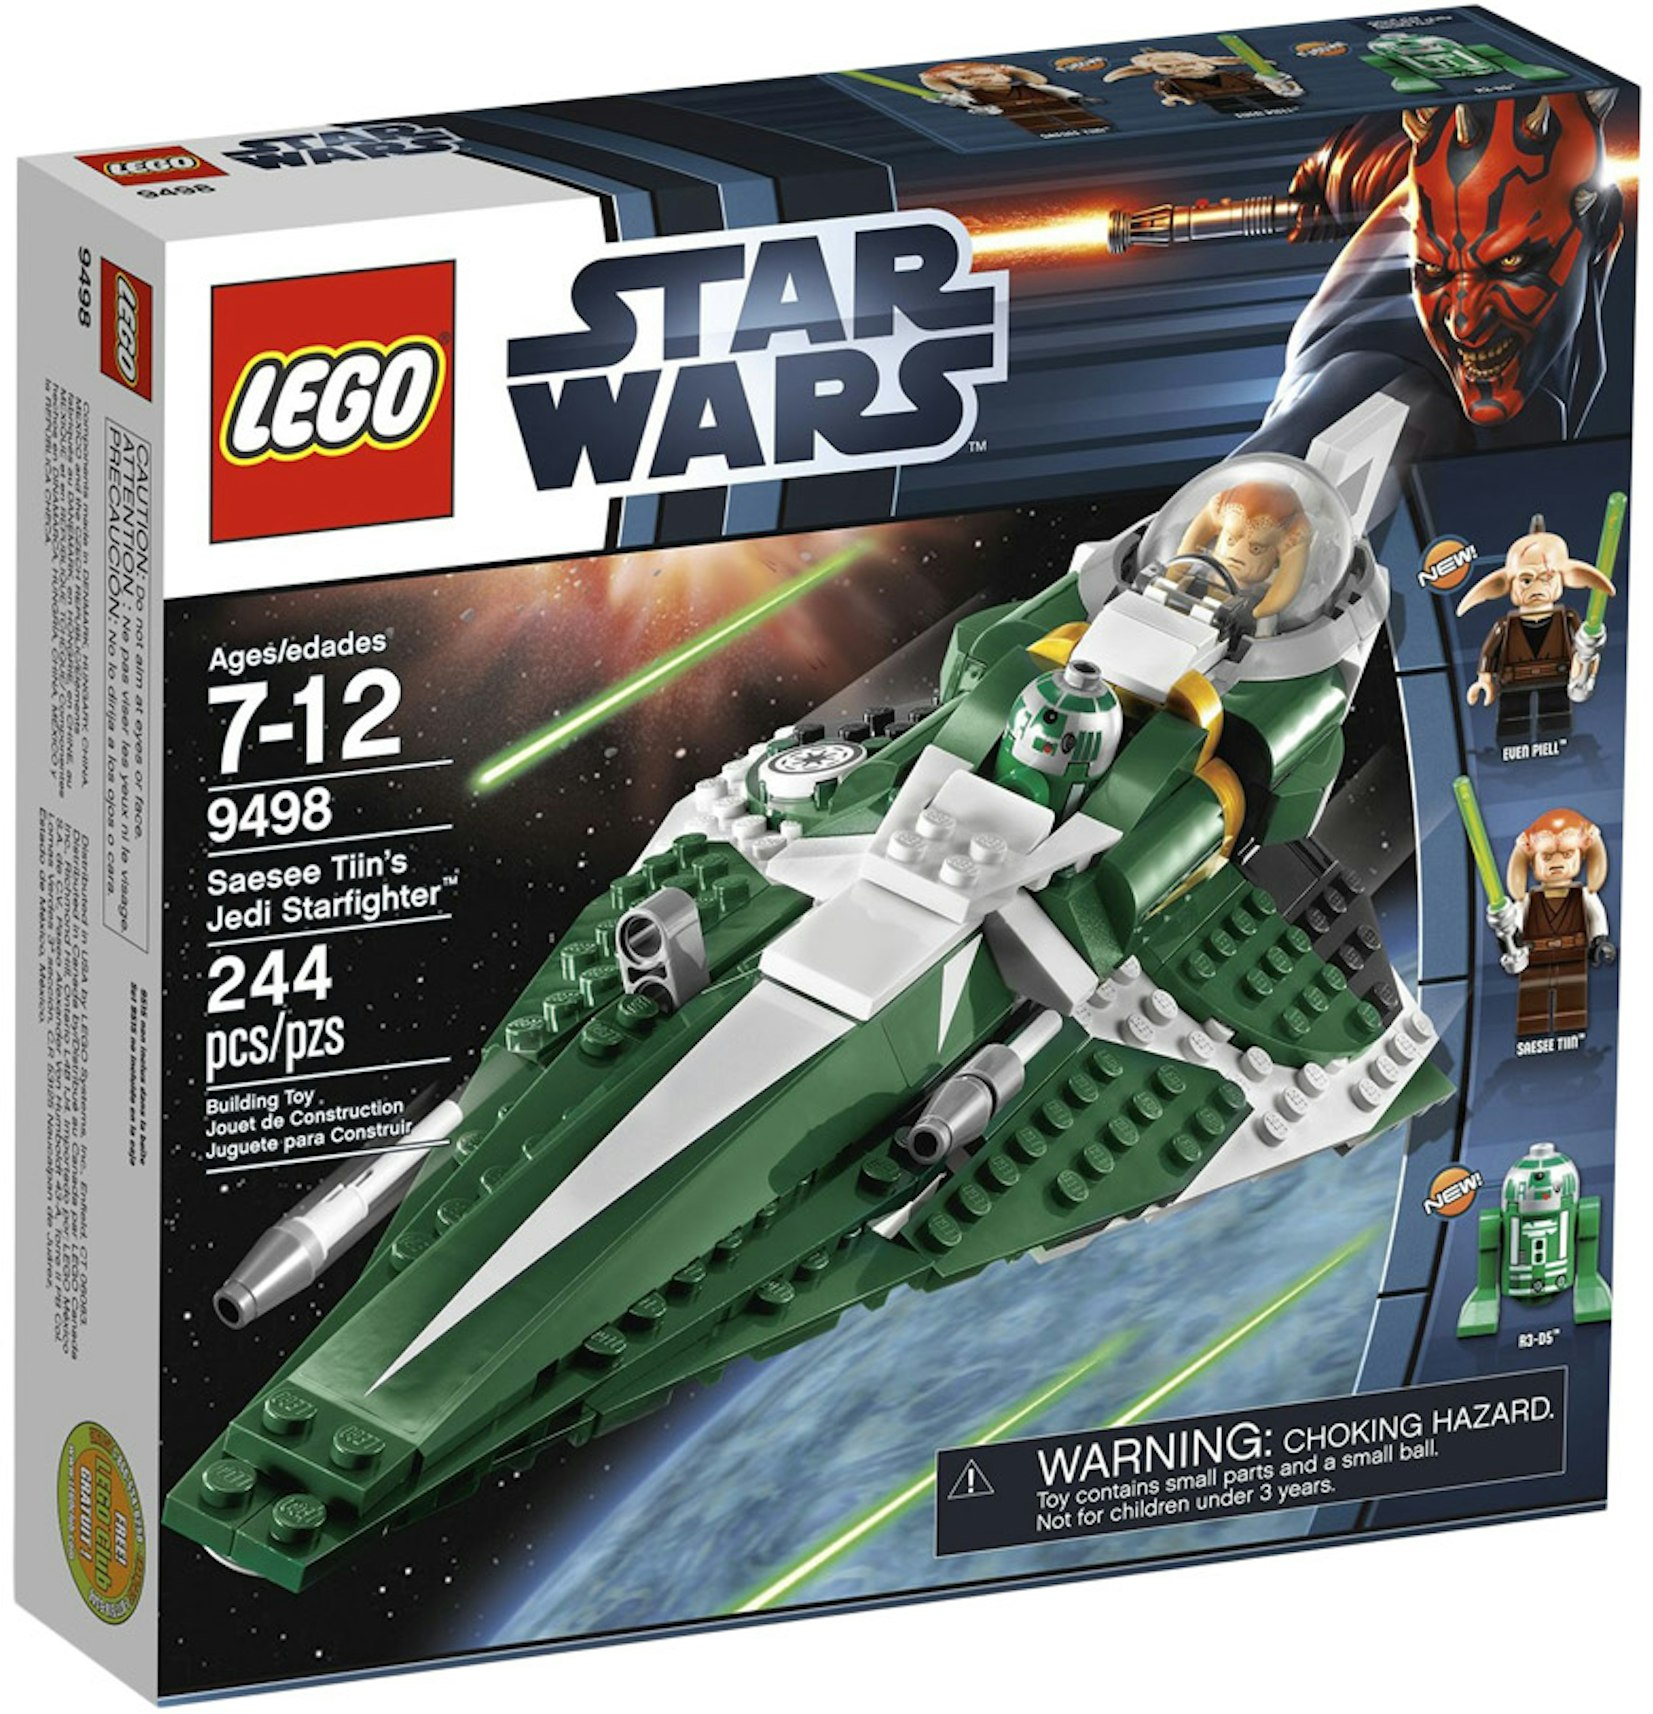 mm rulle Svaghed LEGO Star Wars Saesee Tiin's Jedi Starfighter Set 9498 - US